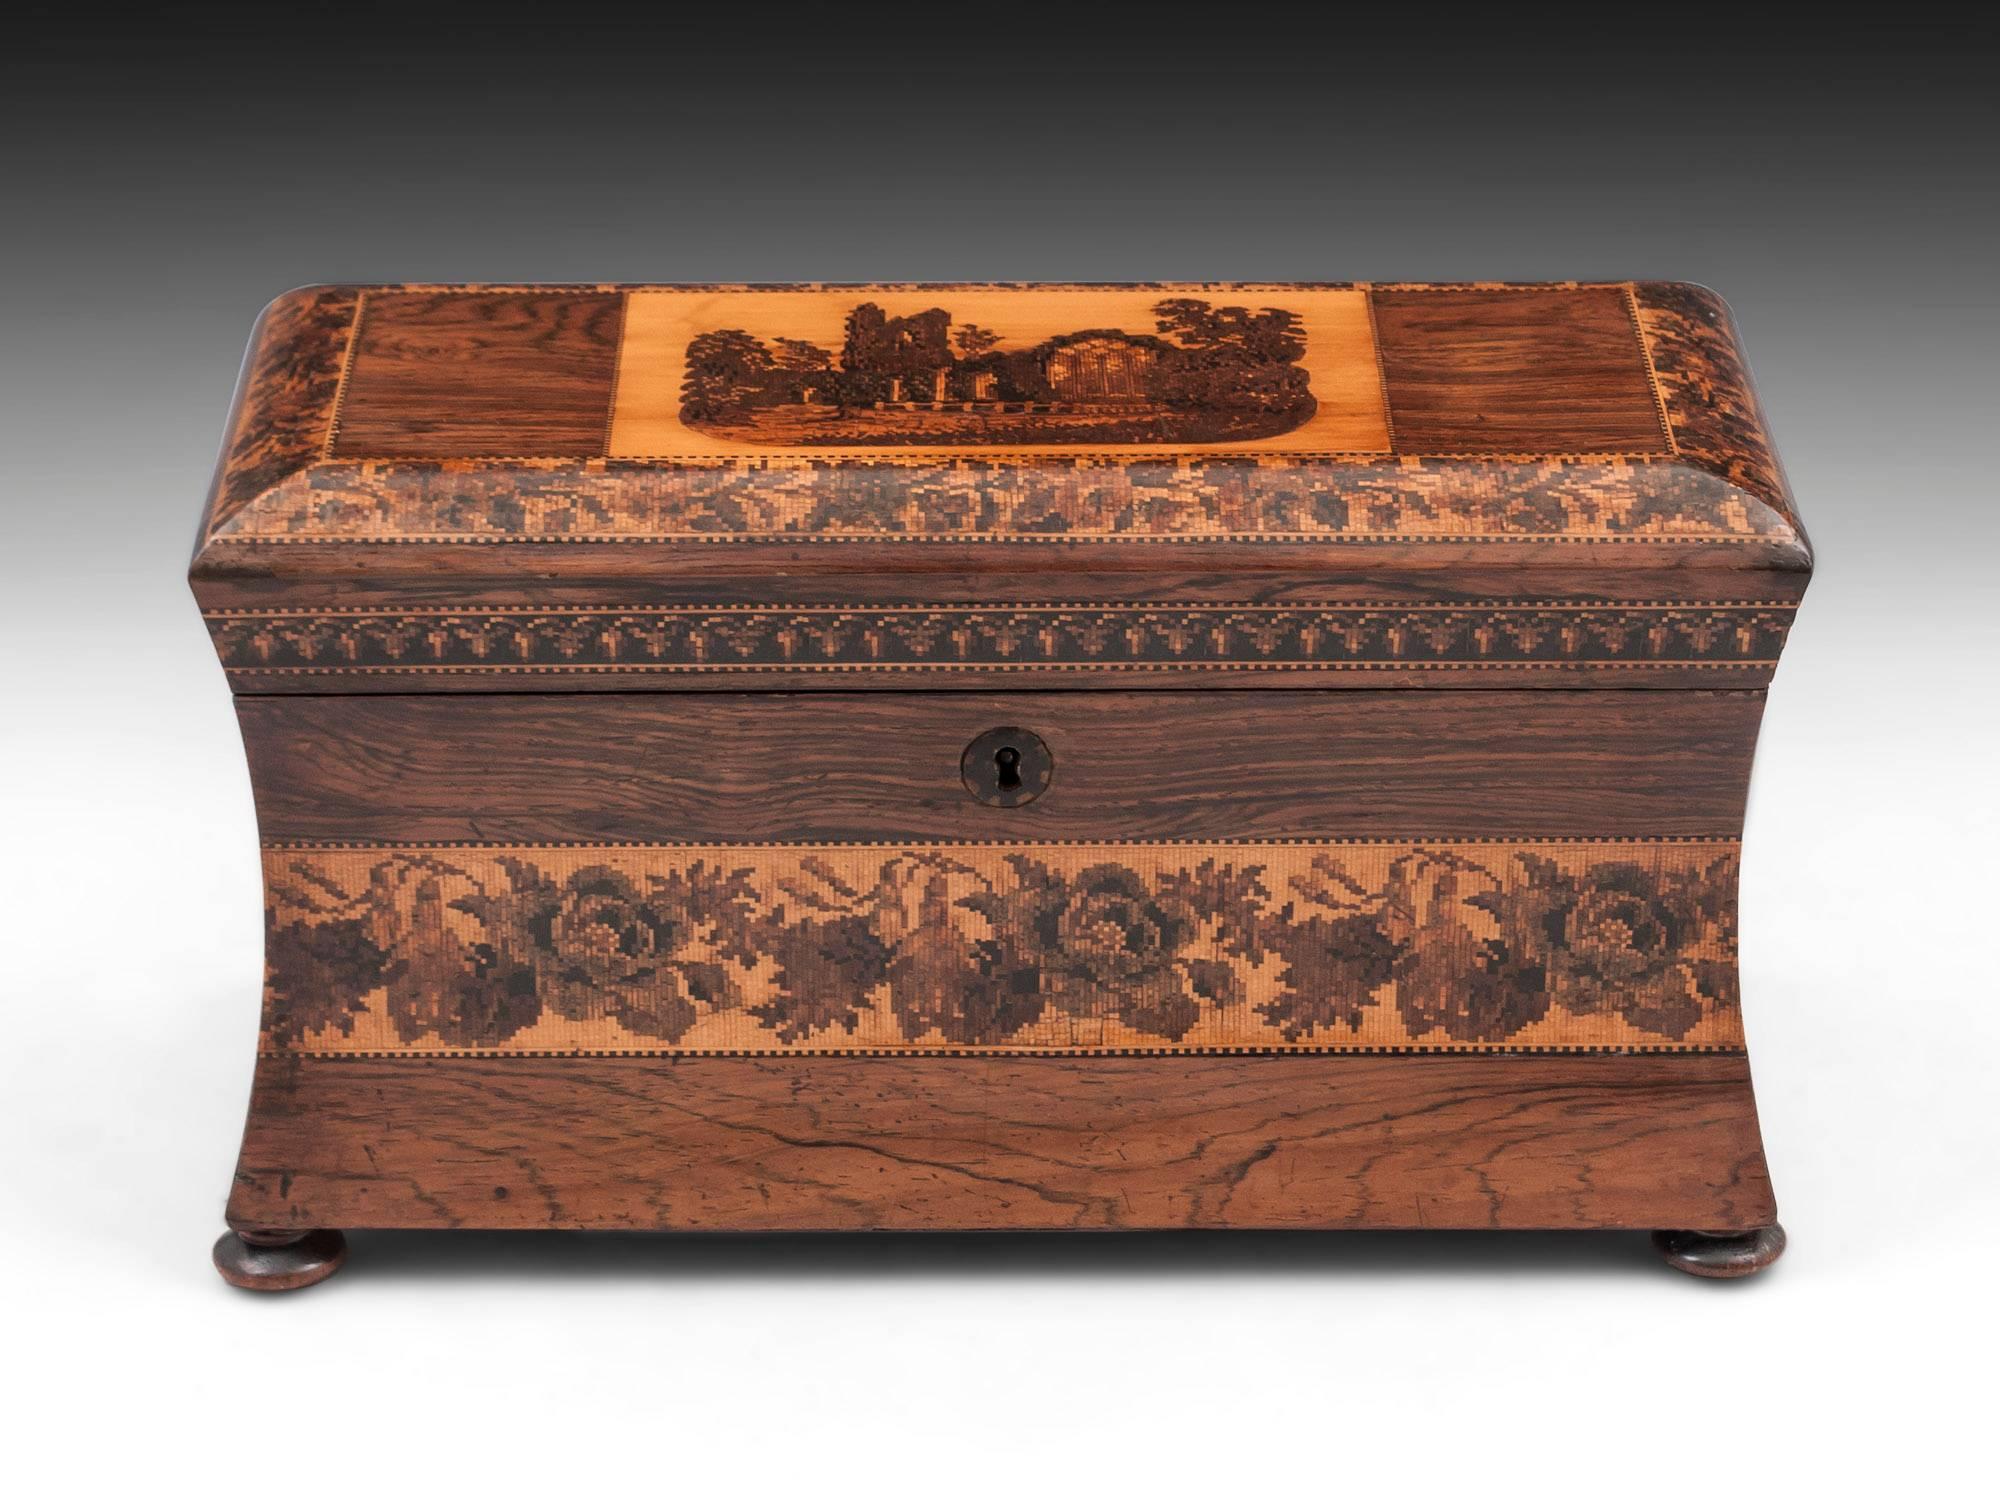 Tunbridge ware mahogany tea chest with a view of Muckross Abbey surrounded by floral borders and standing on four turned wooden feet. 

The interior has been refitted with later inlaid lids and replacement engraved glass mixing bowl, all of this